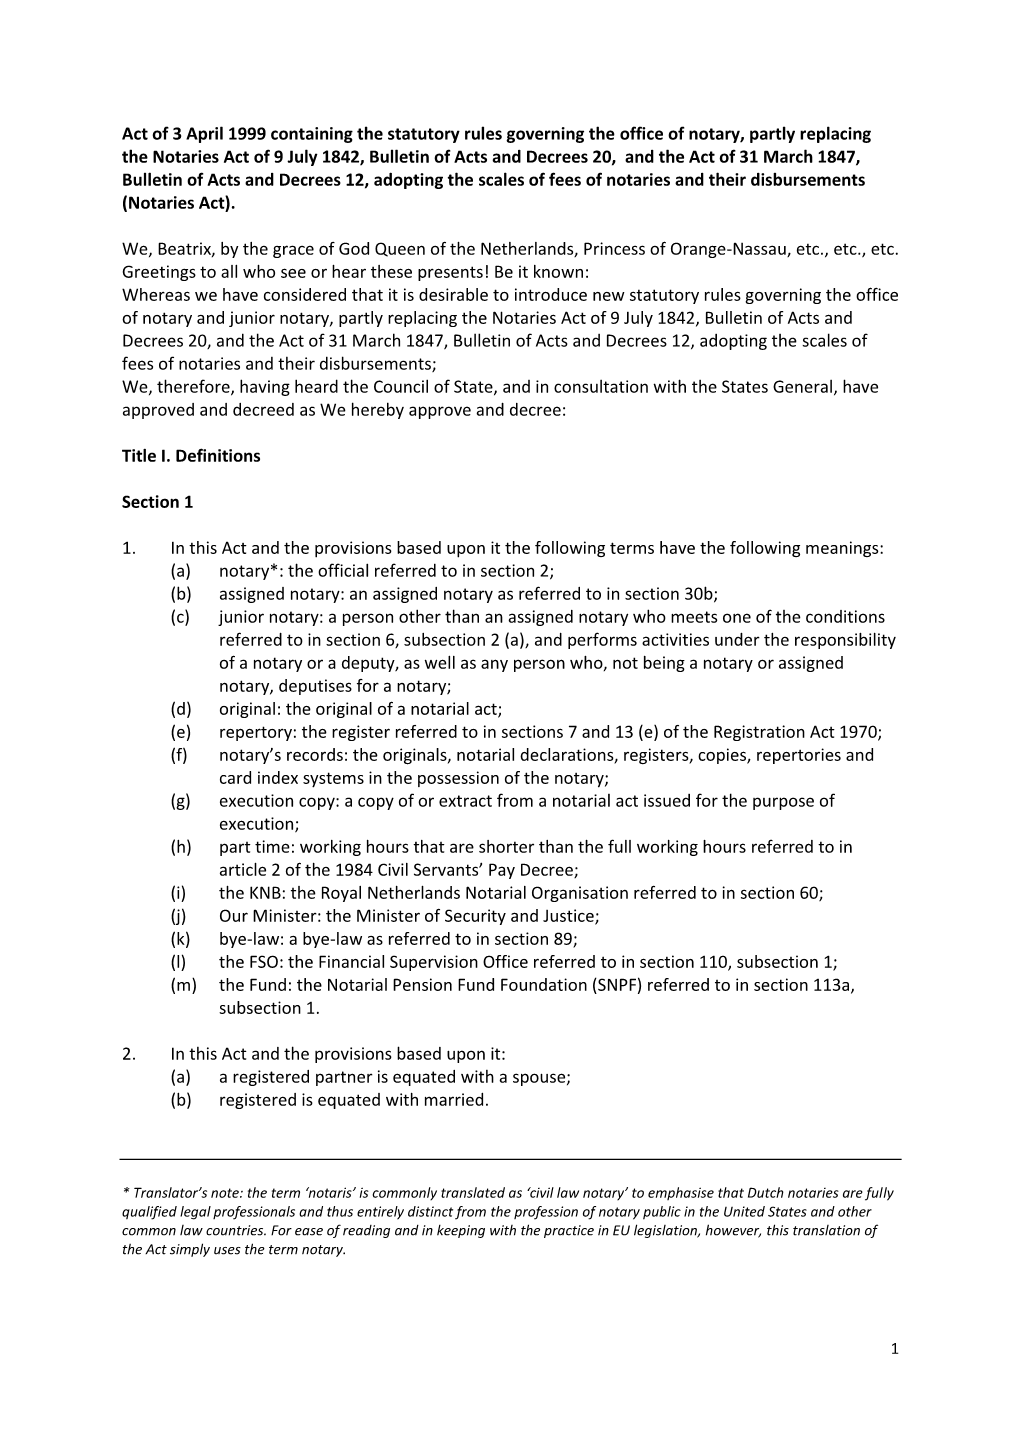 Act of 3 April 1999 Containing the Statutory Rules Governing the Office